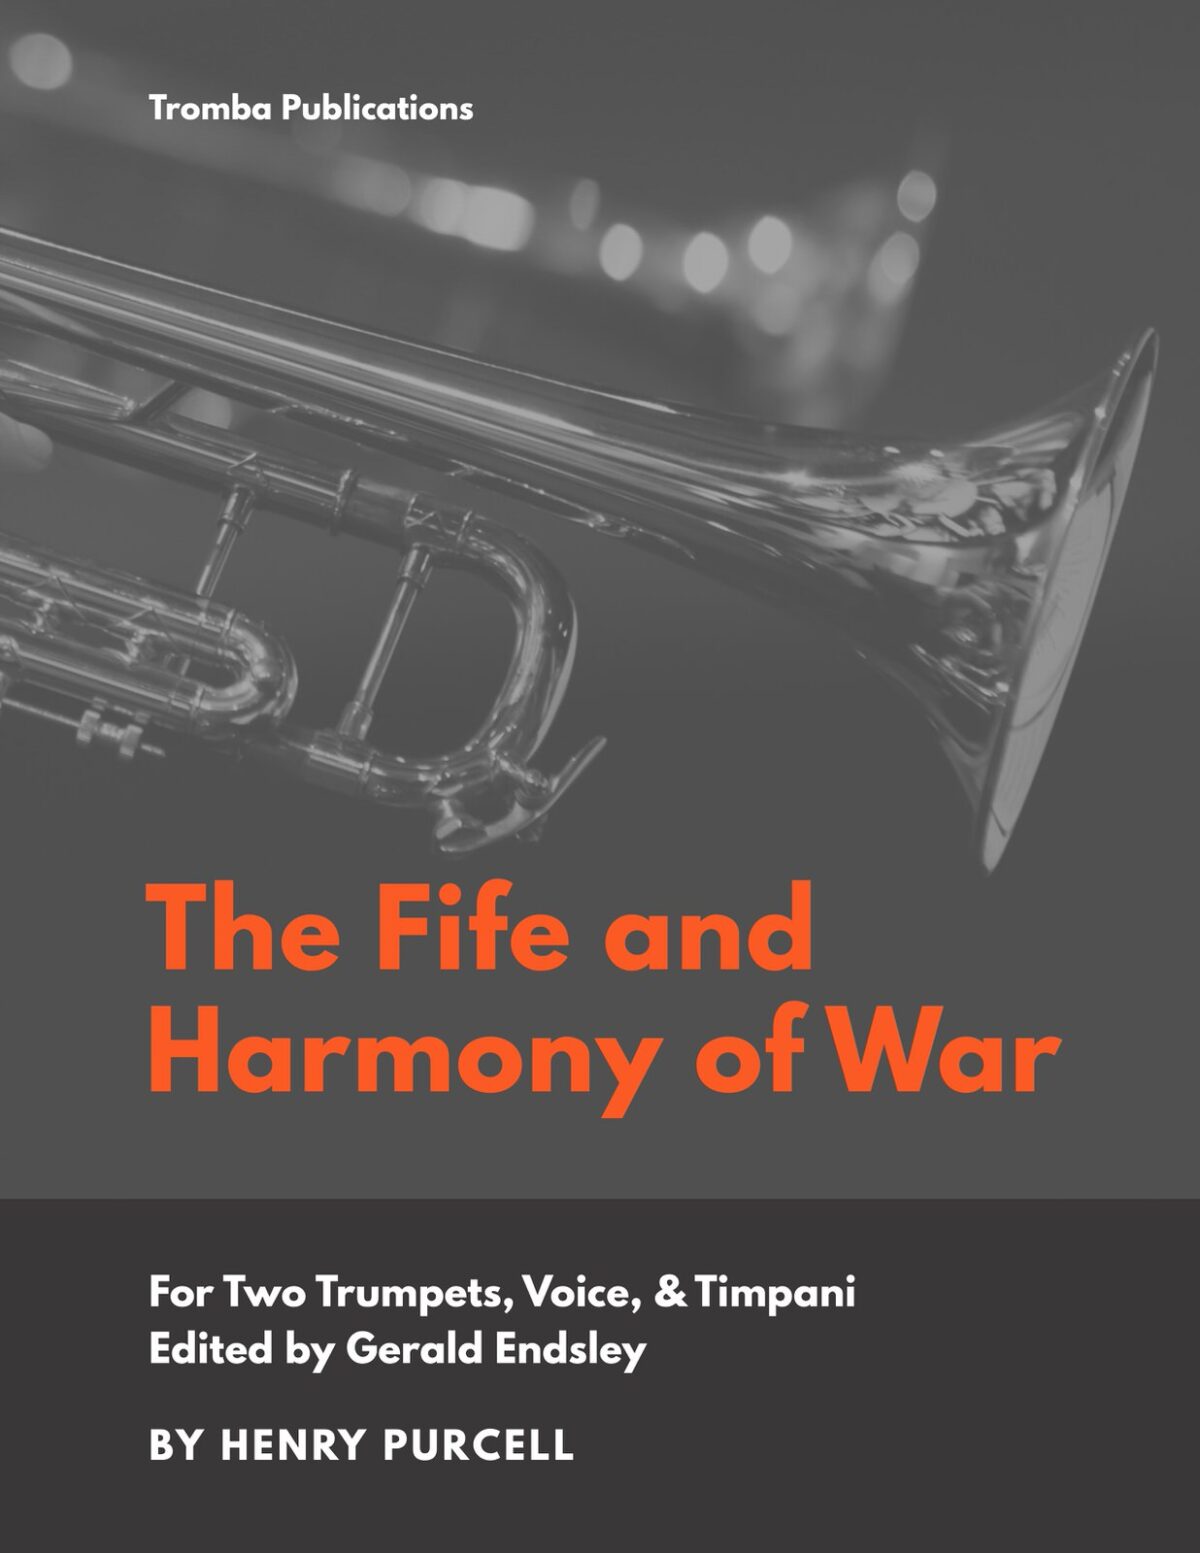 Purcell, Fife and Harmony of War-p01